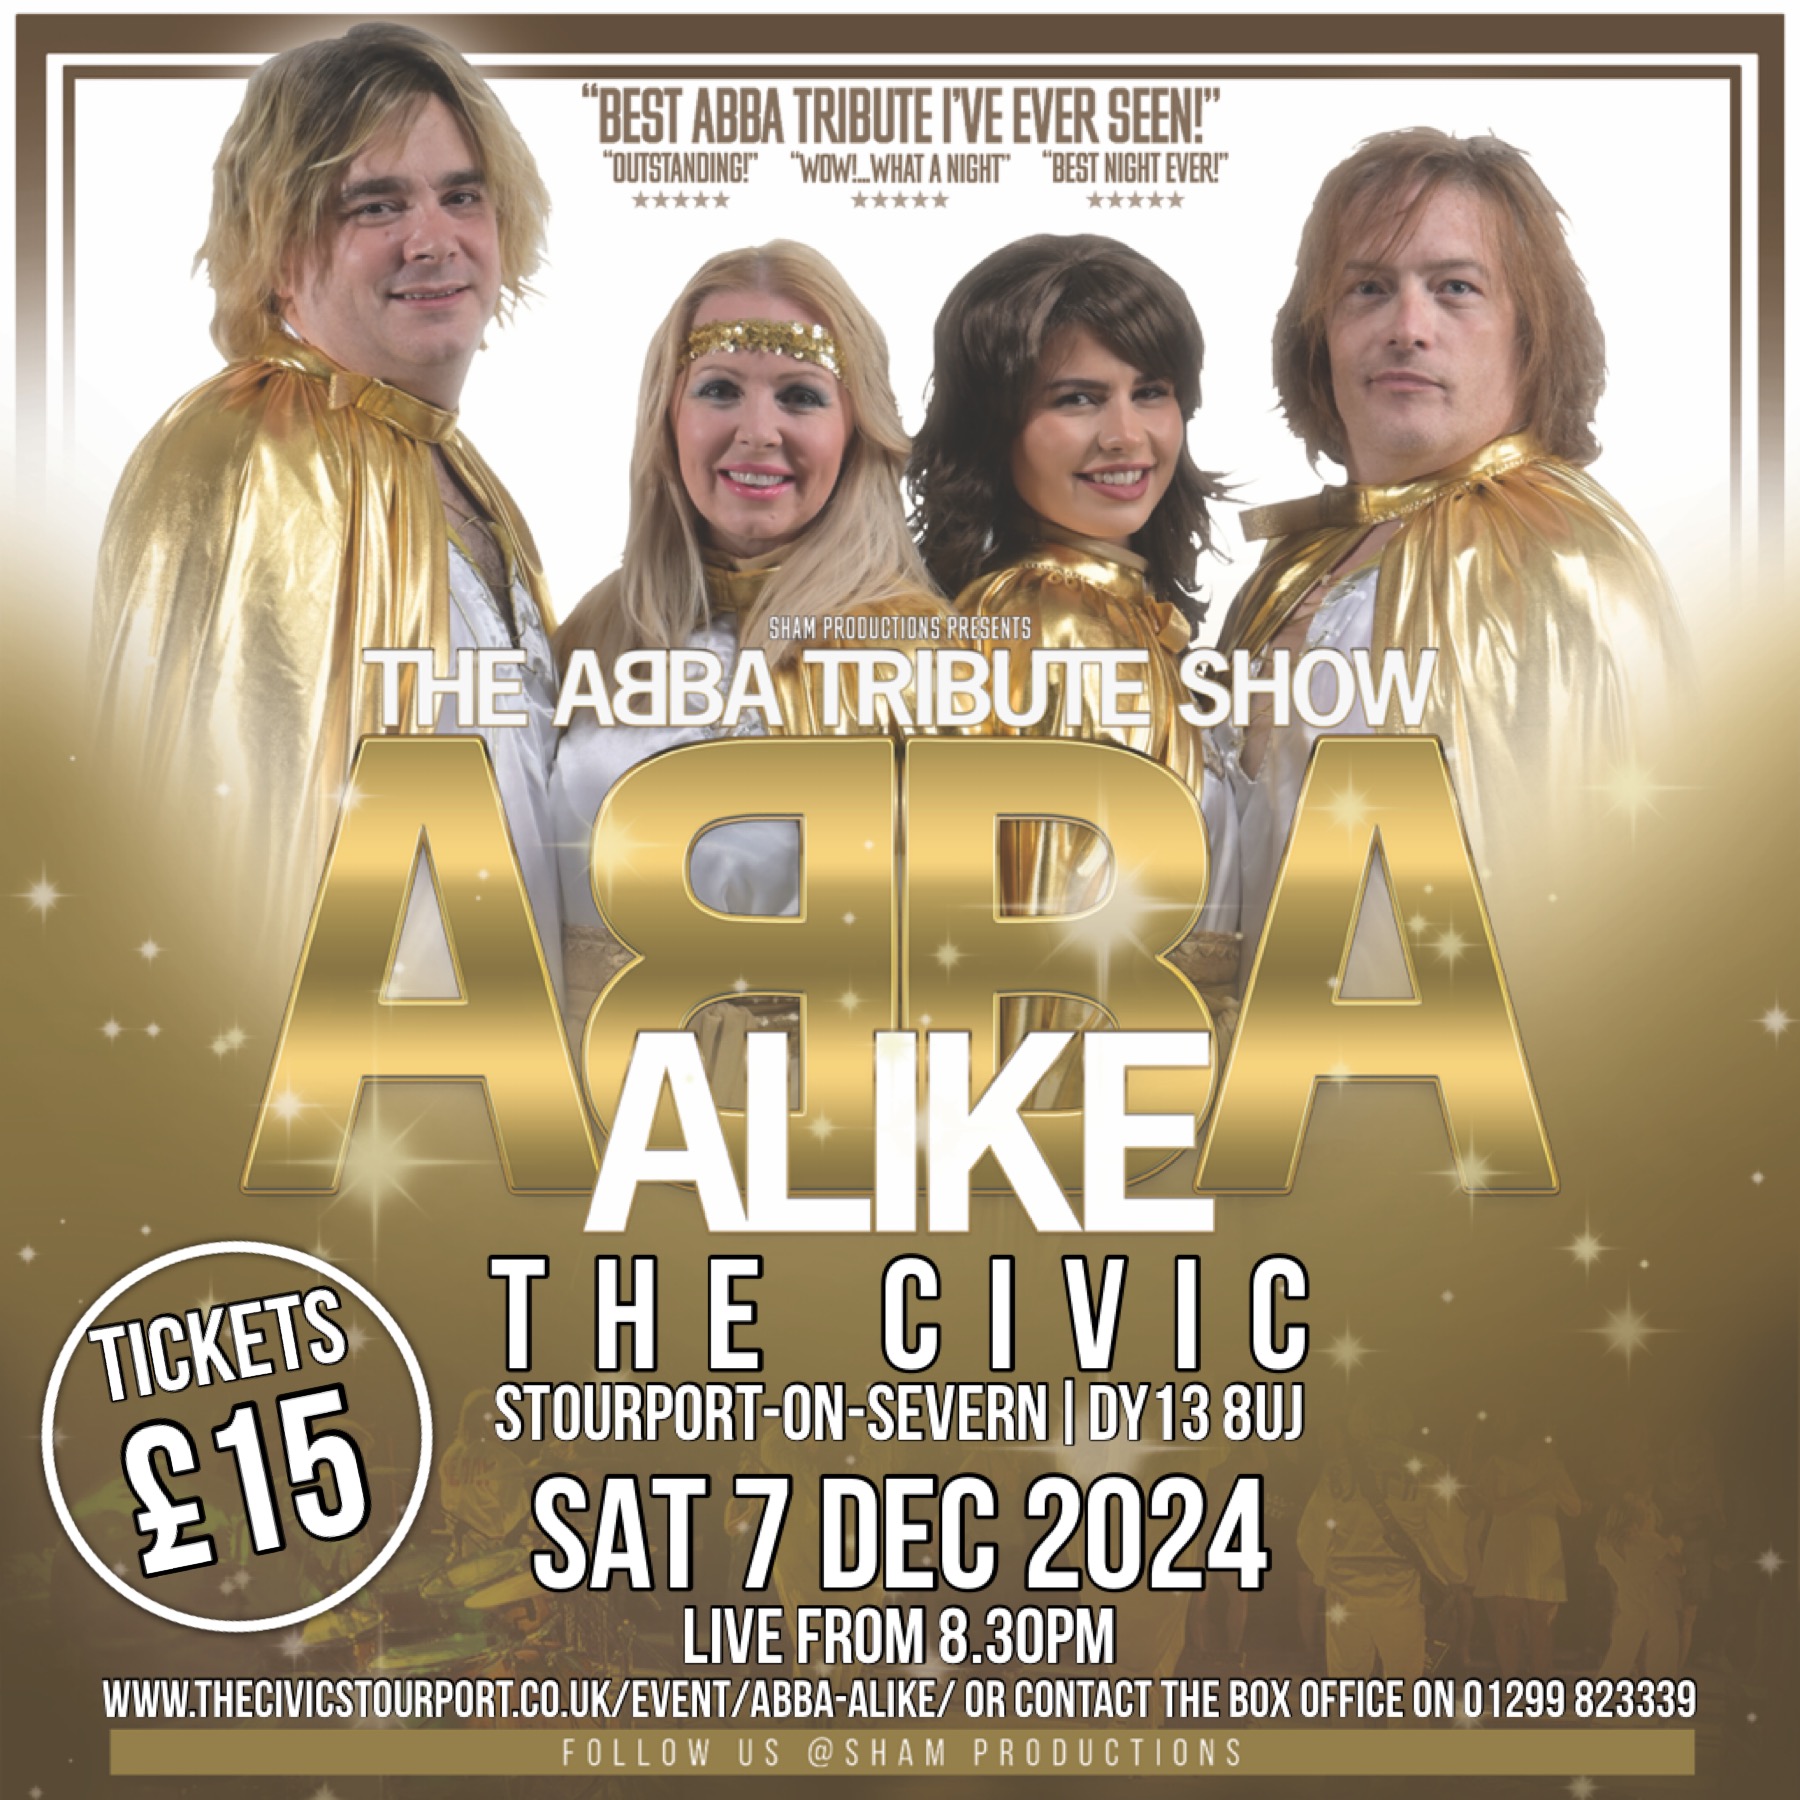 Capturing the unique ABBA sound and feel with incredible attention to detail, Abba Alike bring a full live cast and band, stunning costumes and breath-taking choreography They will have you up singing and dancing in no time!